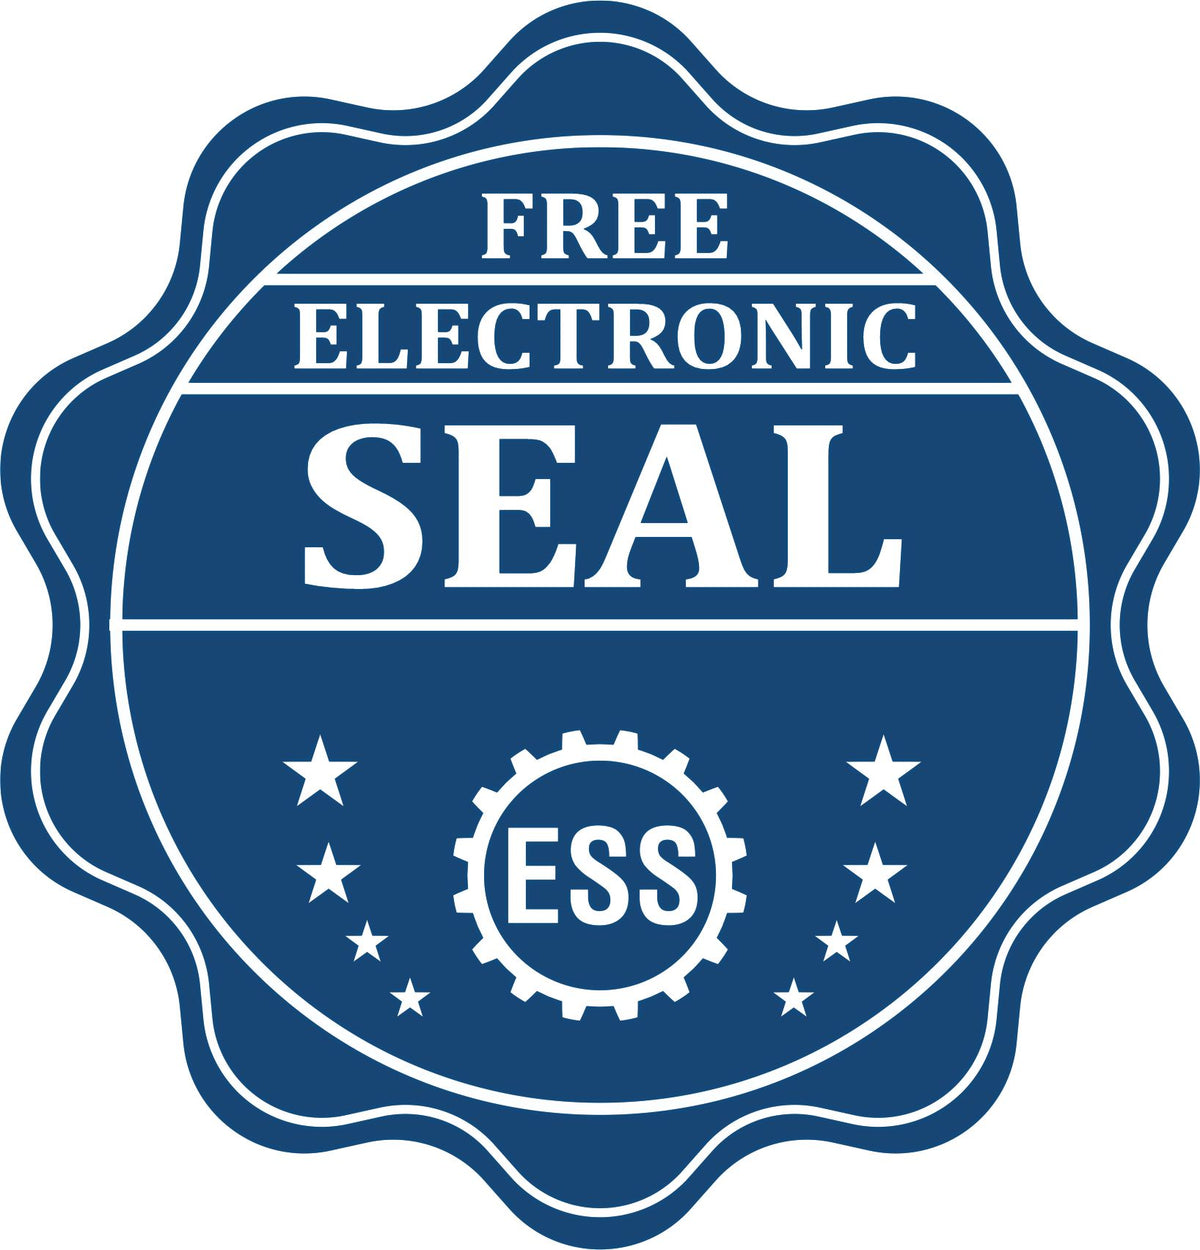 A badge showing a free electronic seal for the Soft New Hampshire Professional Geologist Seal with stars and the ESS gear on the emblem.